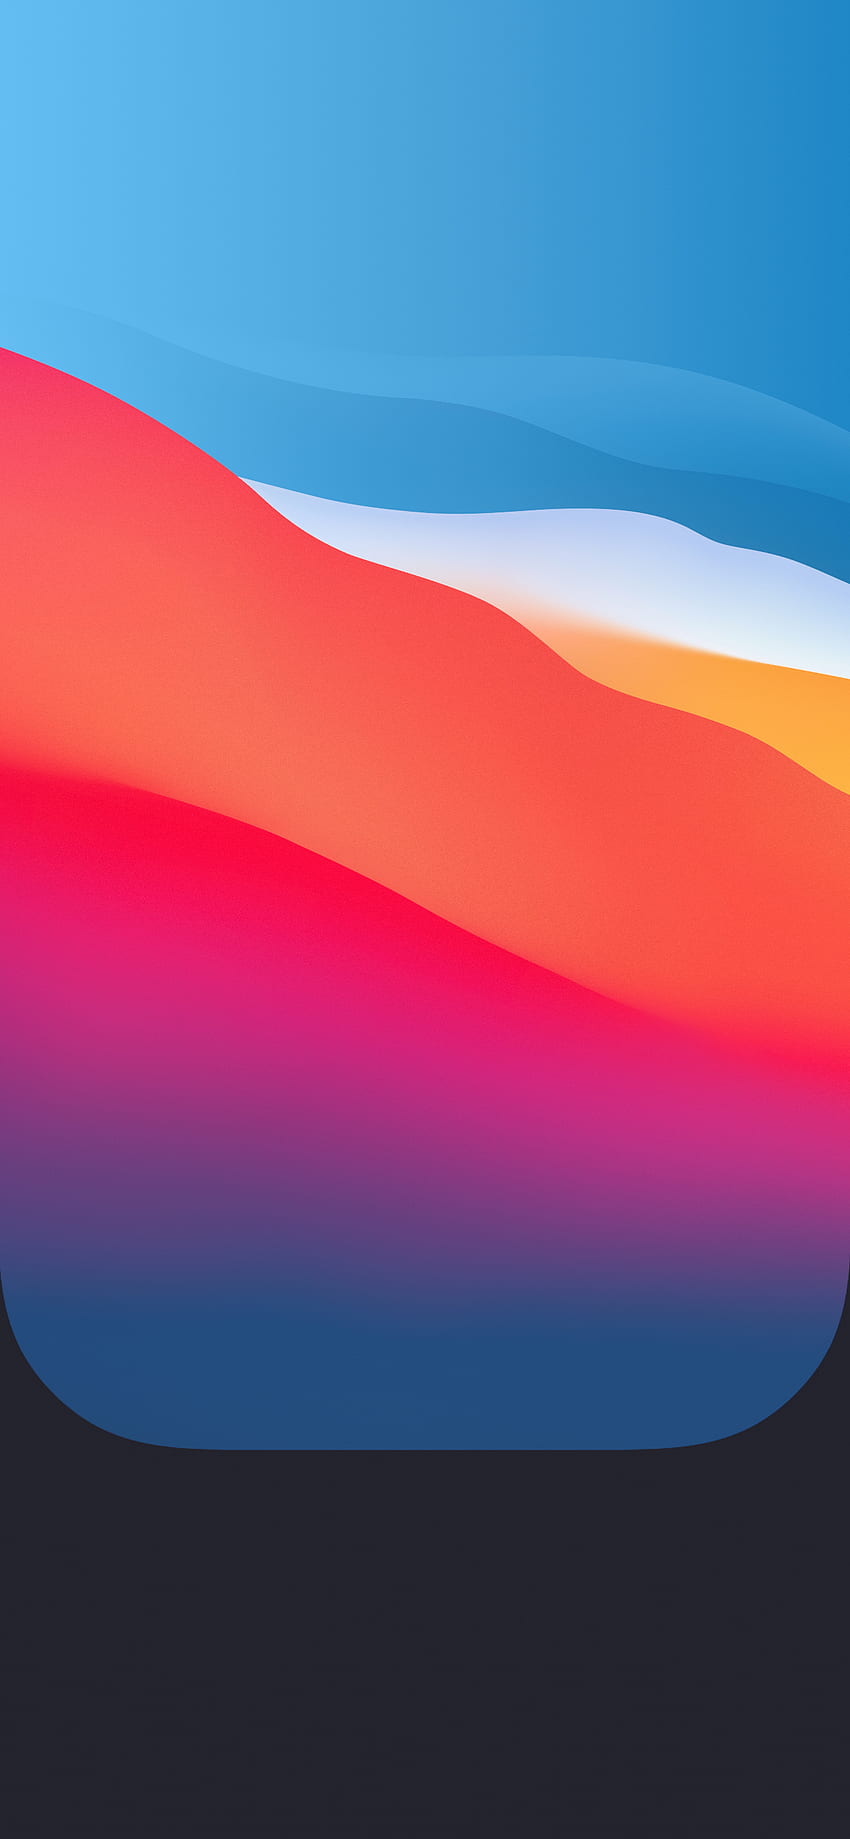 macOS Big Sur and iOS 14 mods for iPhone, Blue Dock HD phone wallpaper